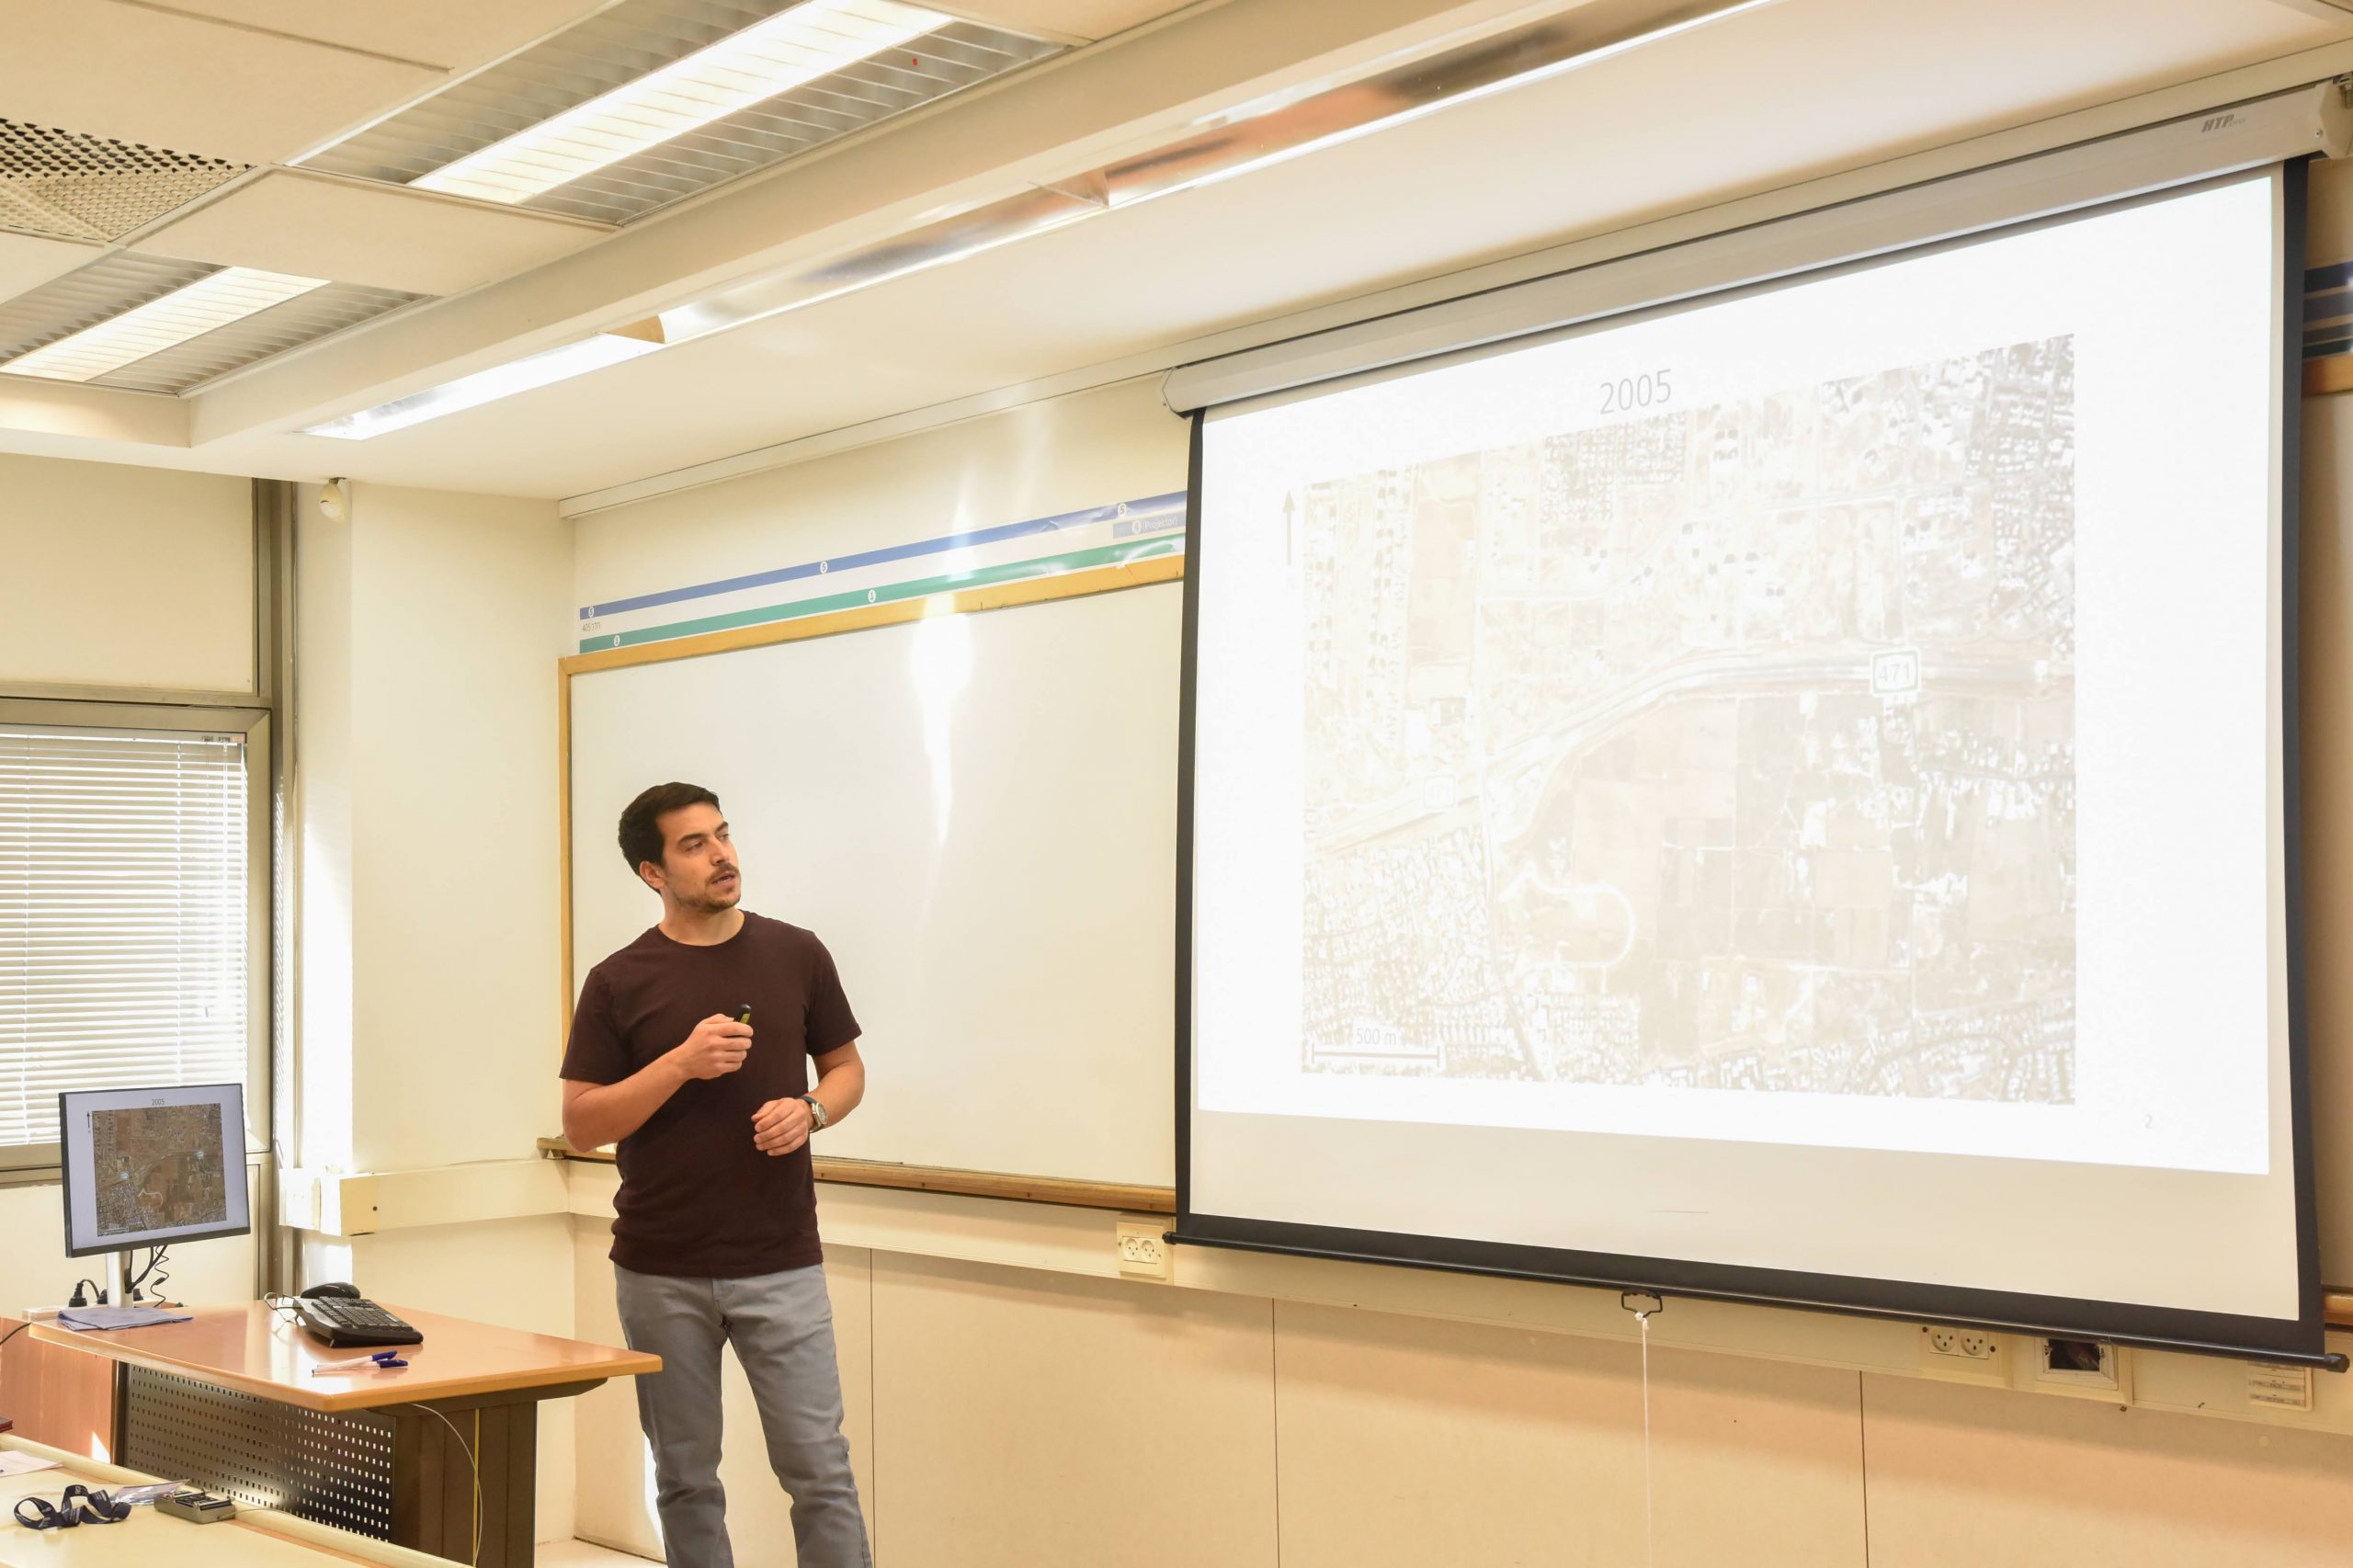 Ofer Snir presents the new study at the GWRI Conference in the Technion. Photo by Sharon Tzur, Technion Spokesperson's Office